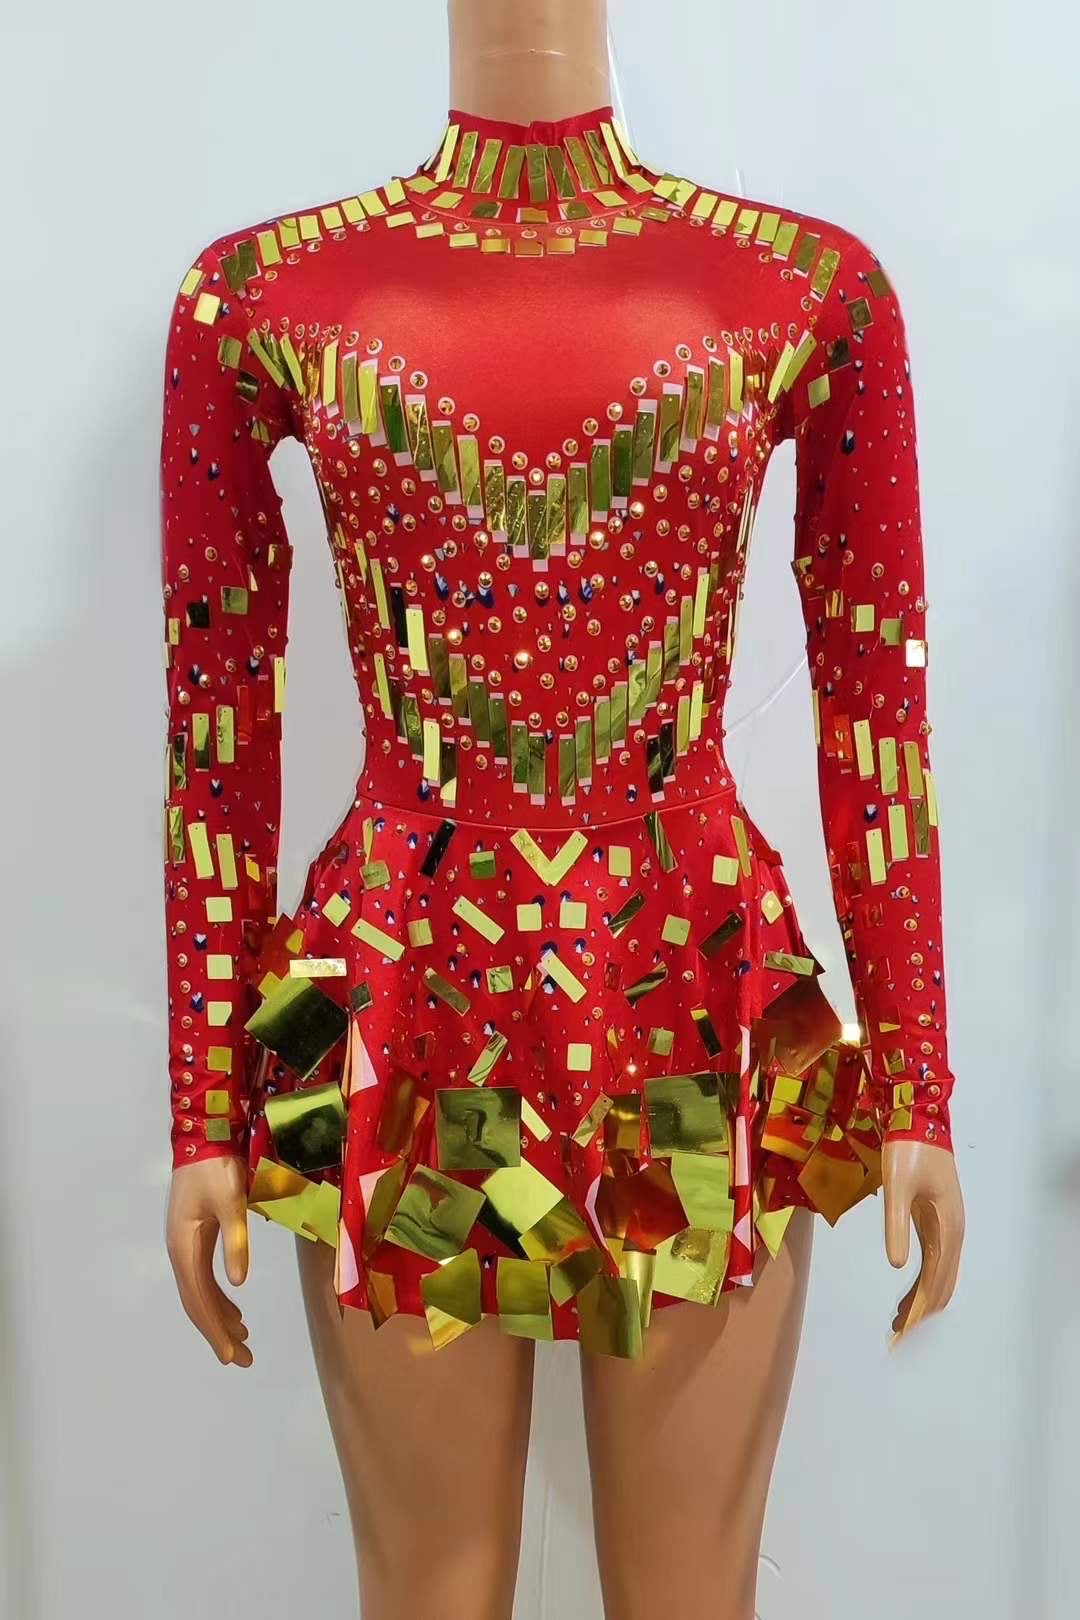 Disco Red and Gold remix dress